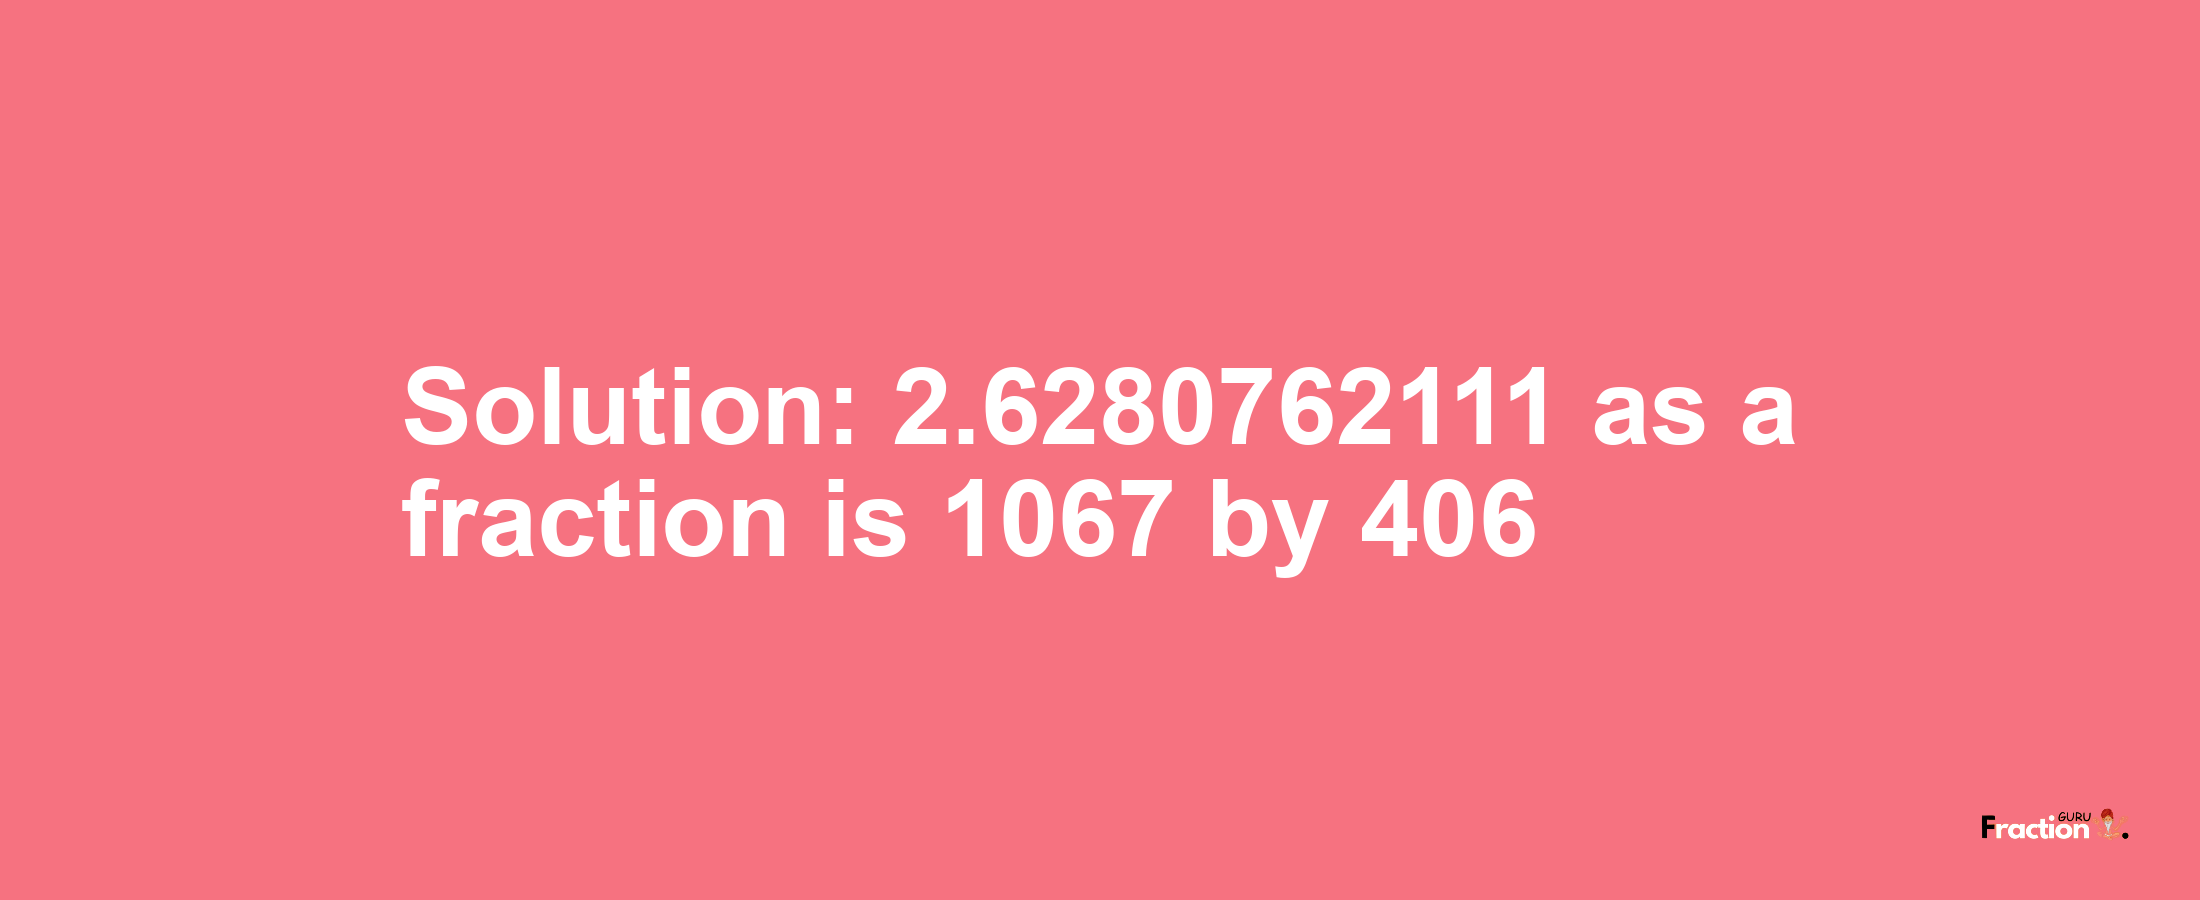 Solution:2.6280762111 as a fraction is 1067/406